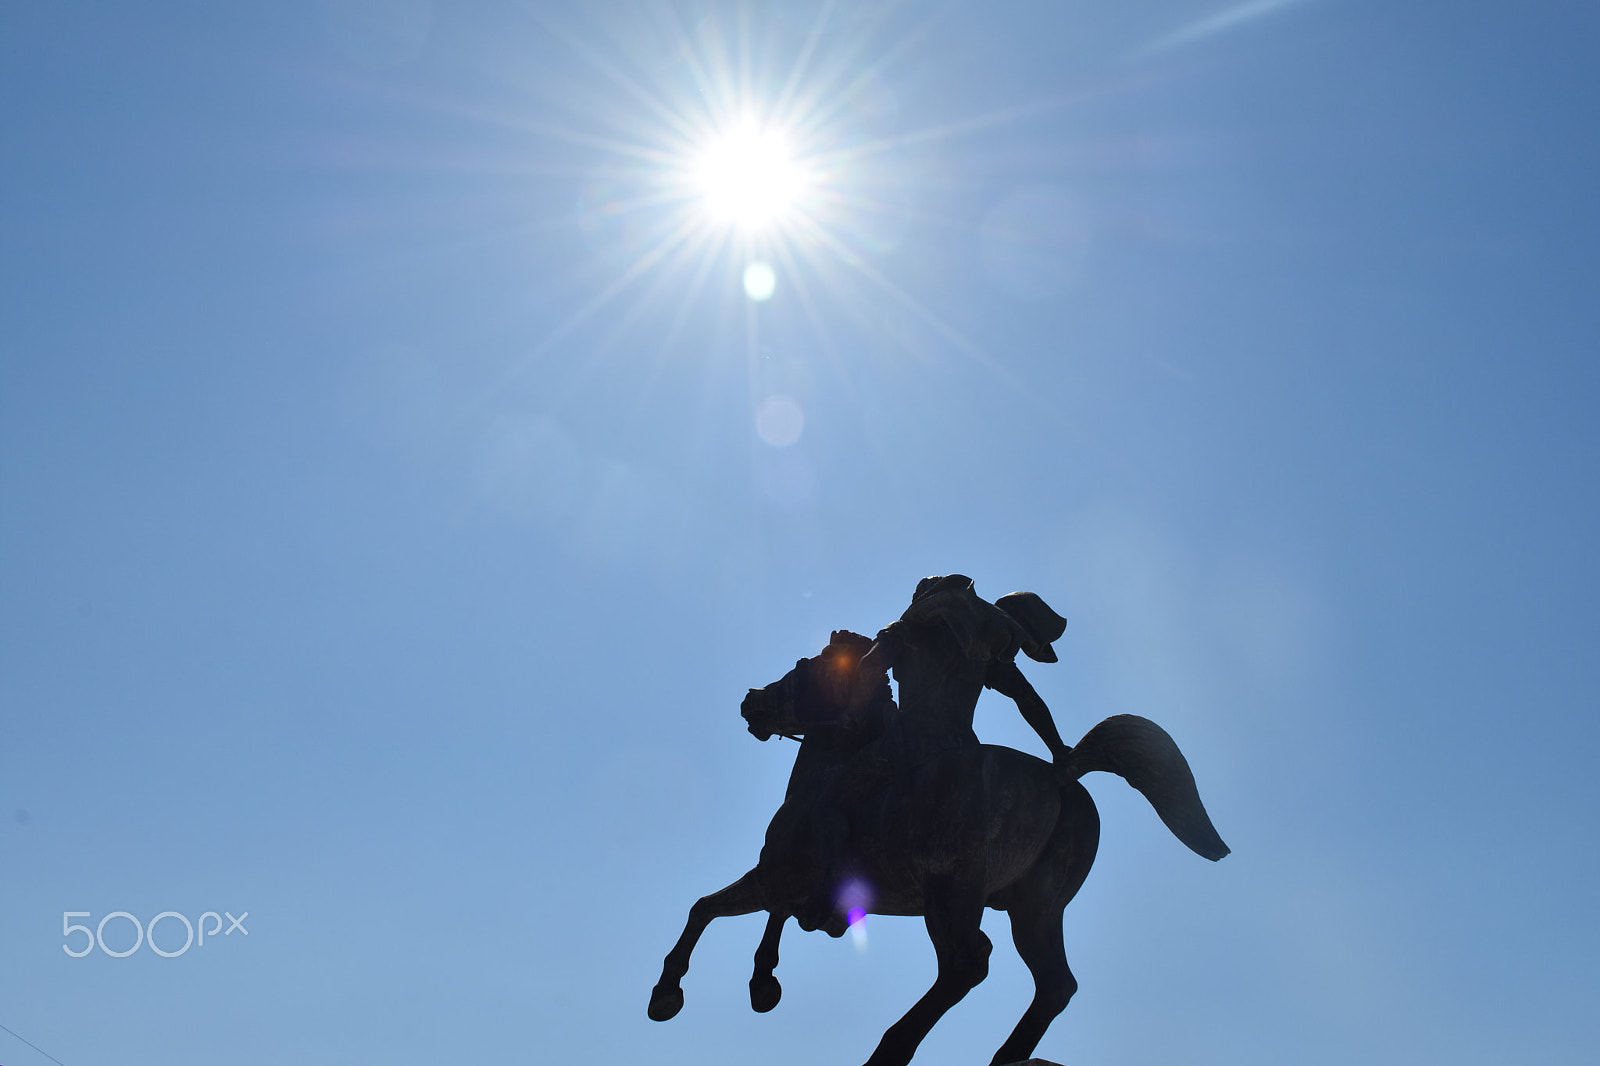 Nikon D7200 + Nikon AF-S DX Nikkor 18-55mm F3.5-5.6G VR sample photo. "alexander the great" riding in the air photography